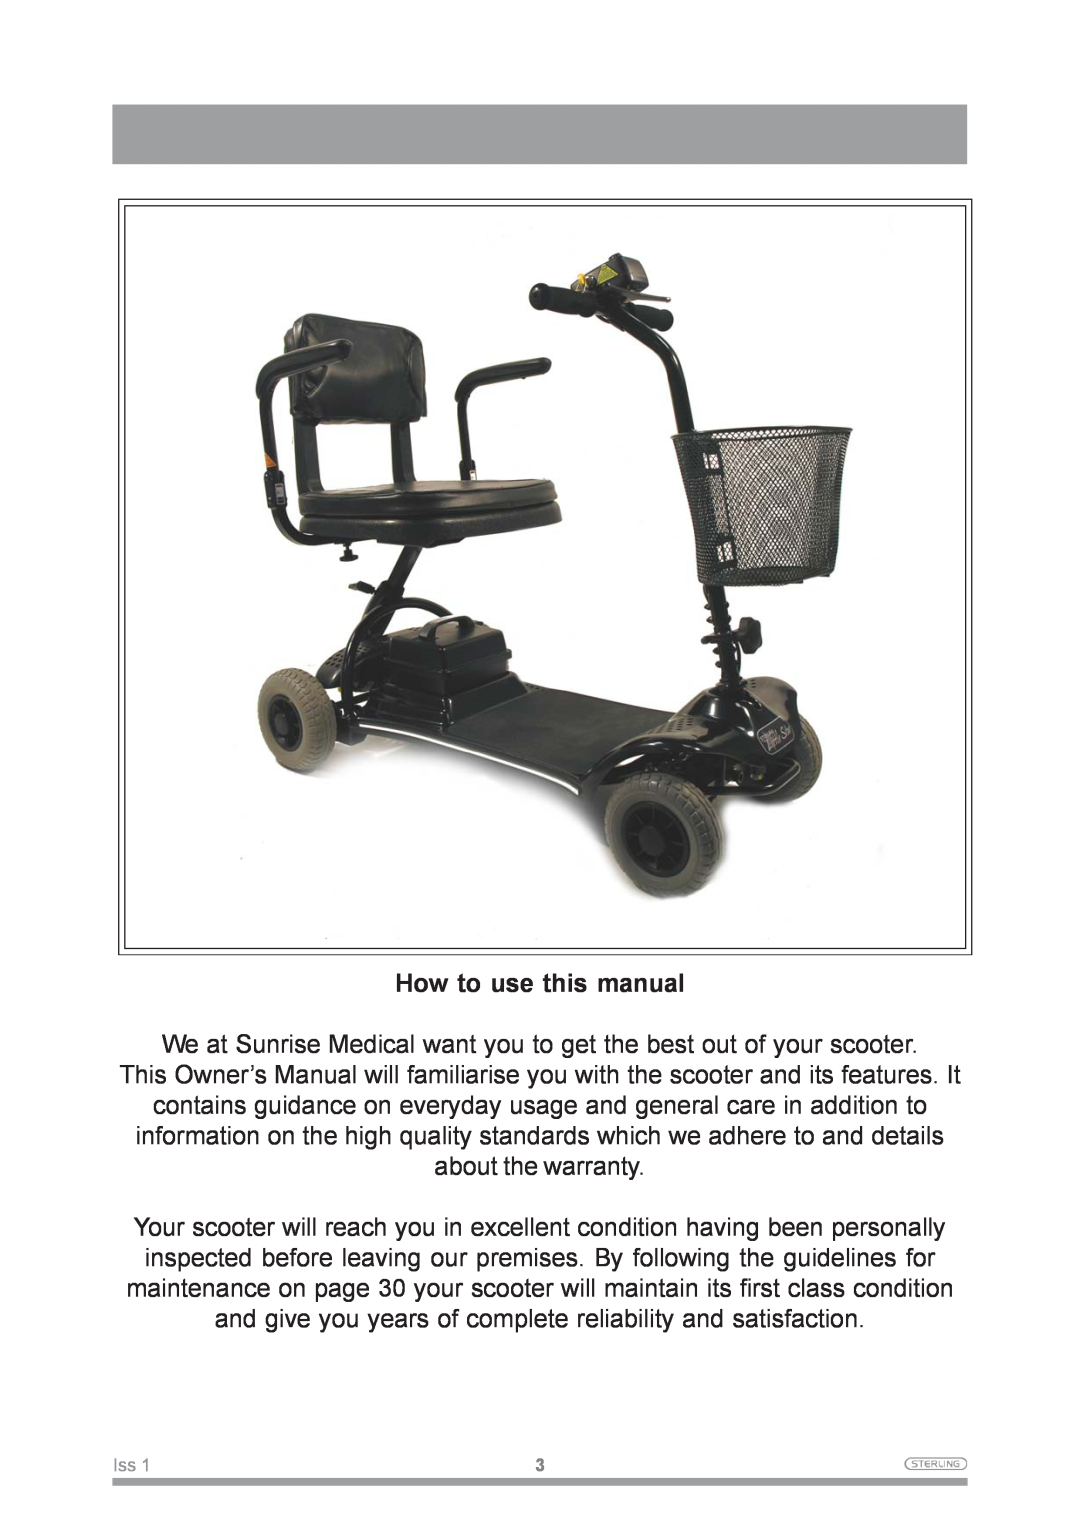 Sunrise Medical Mobility Scooter owner manual How to use this manual 